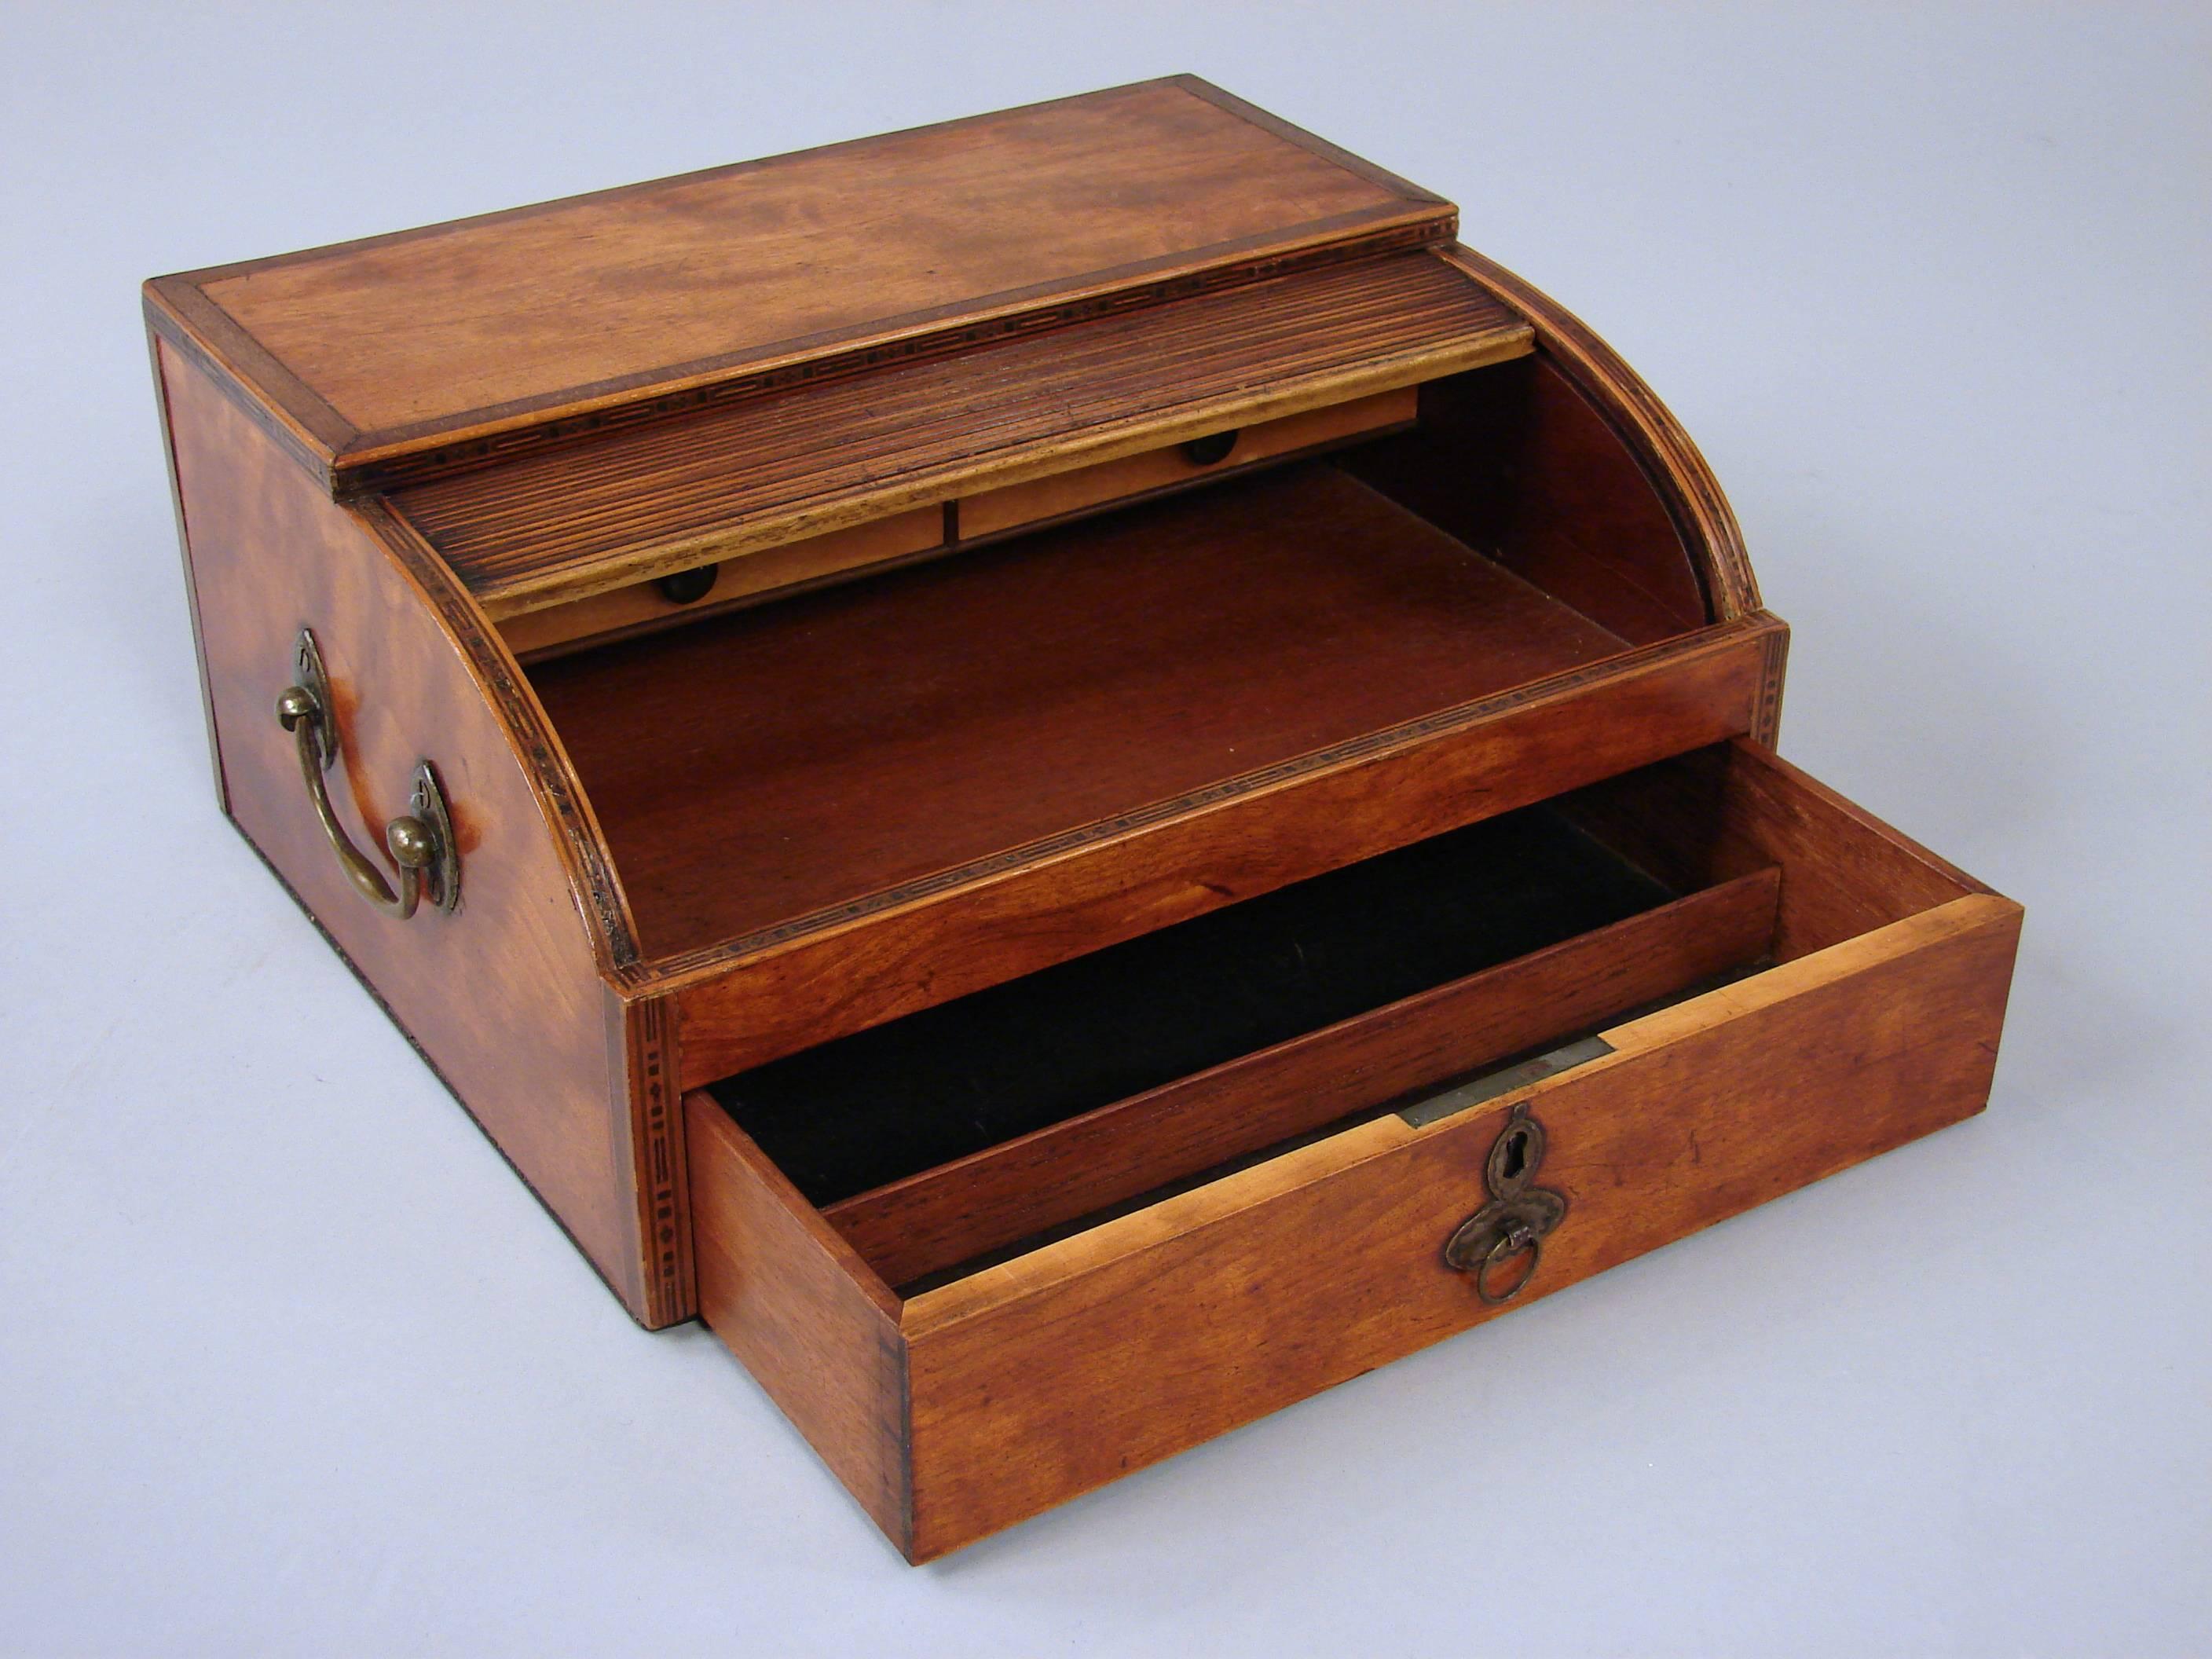 A lovely Georgian satinwood inlaid writing box, the tambour door enclosing a set of drawers with a drawer below, the sides with handles. Opening the tambour causes the drawer to open as well.